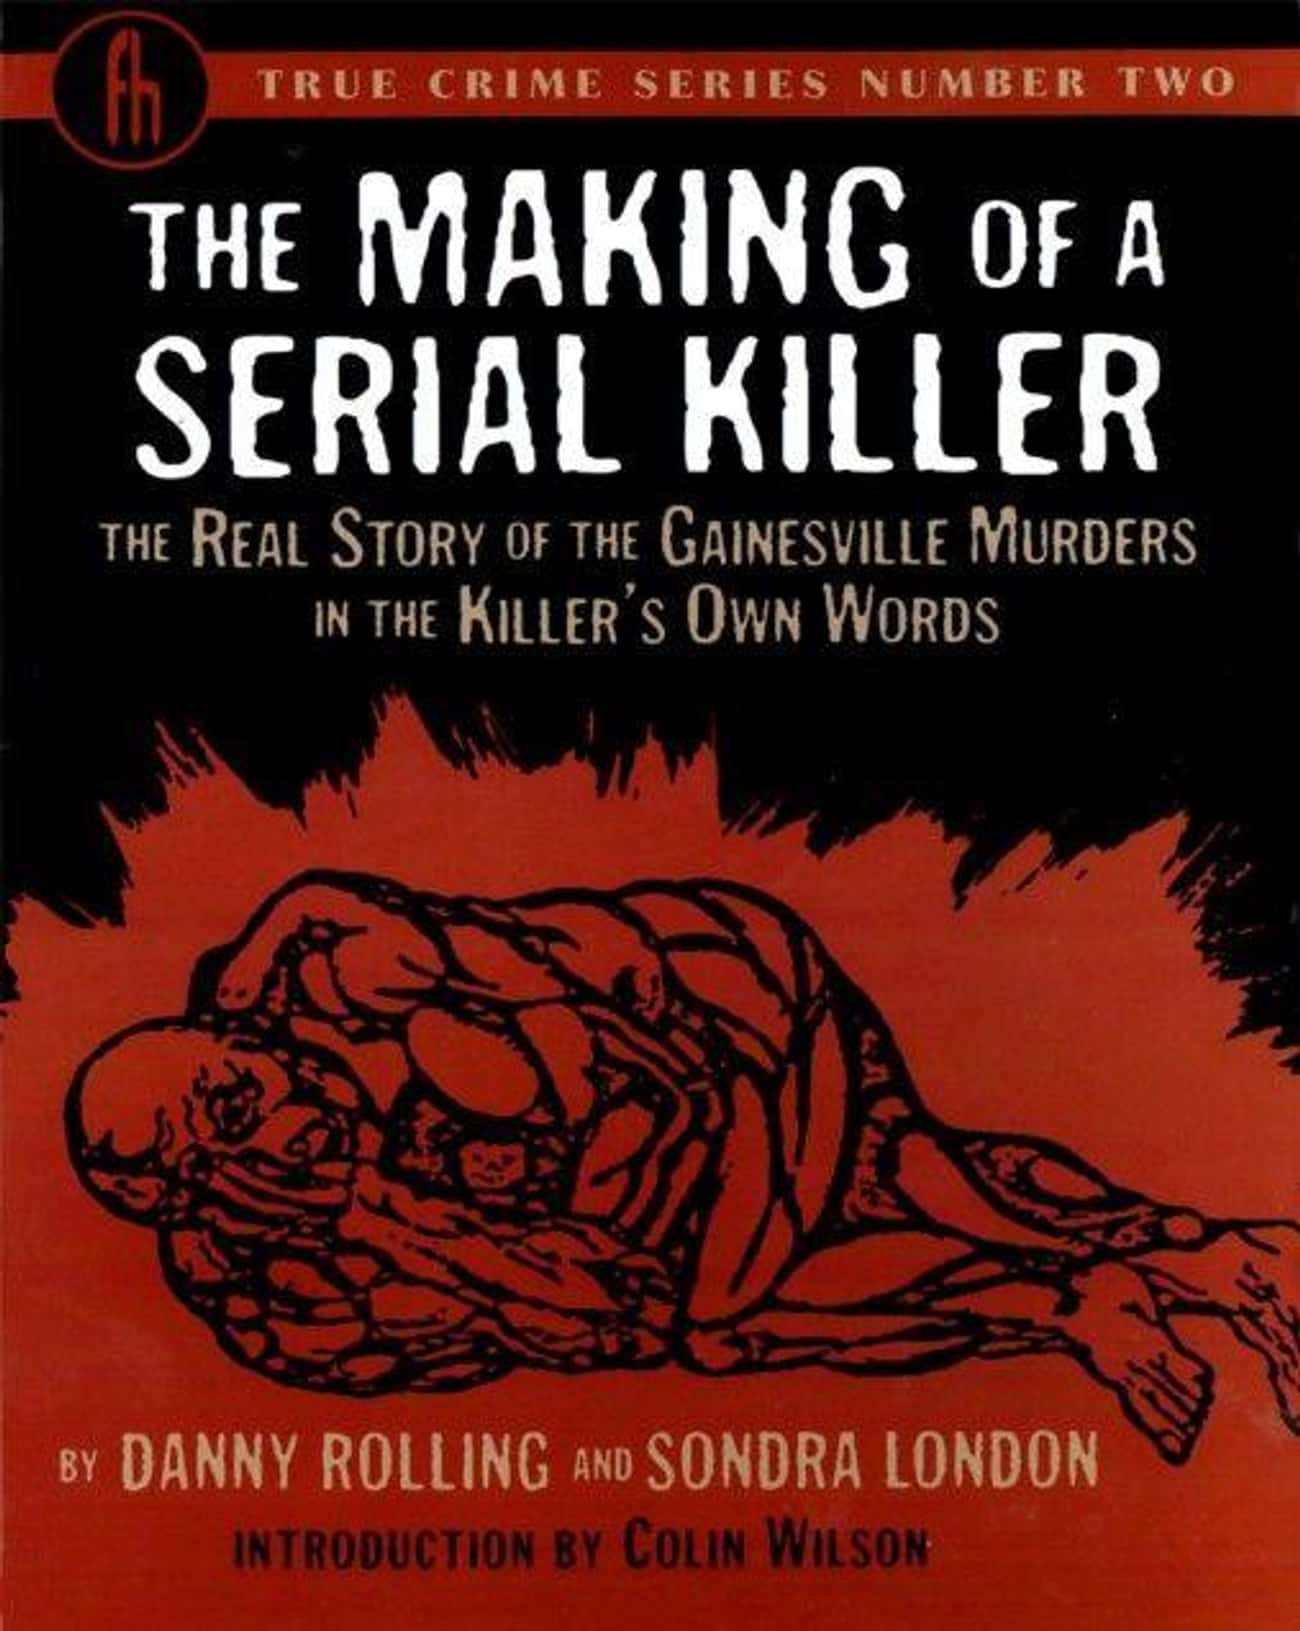 The Making Of A Serial Killer -  Danny Rolling And Sondra London